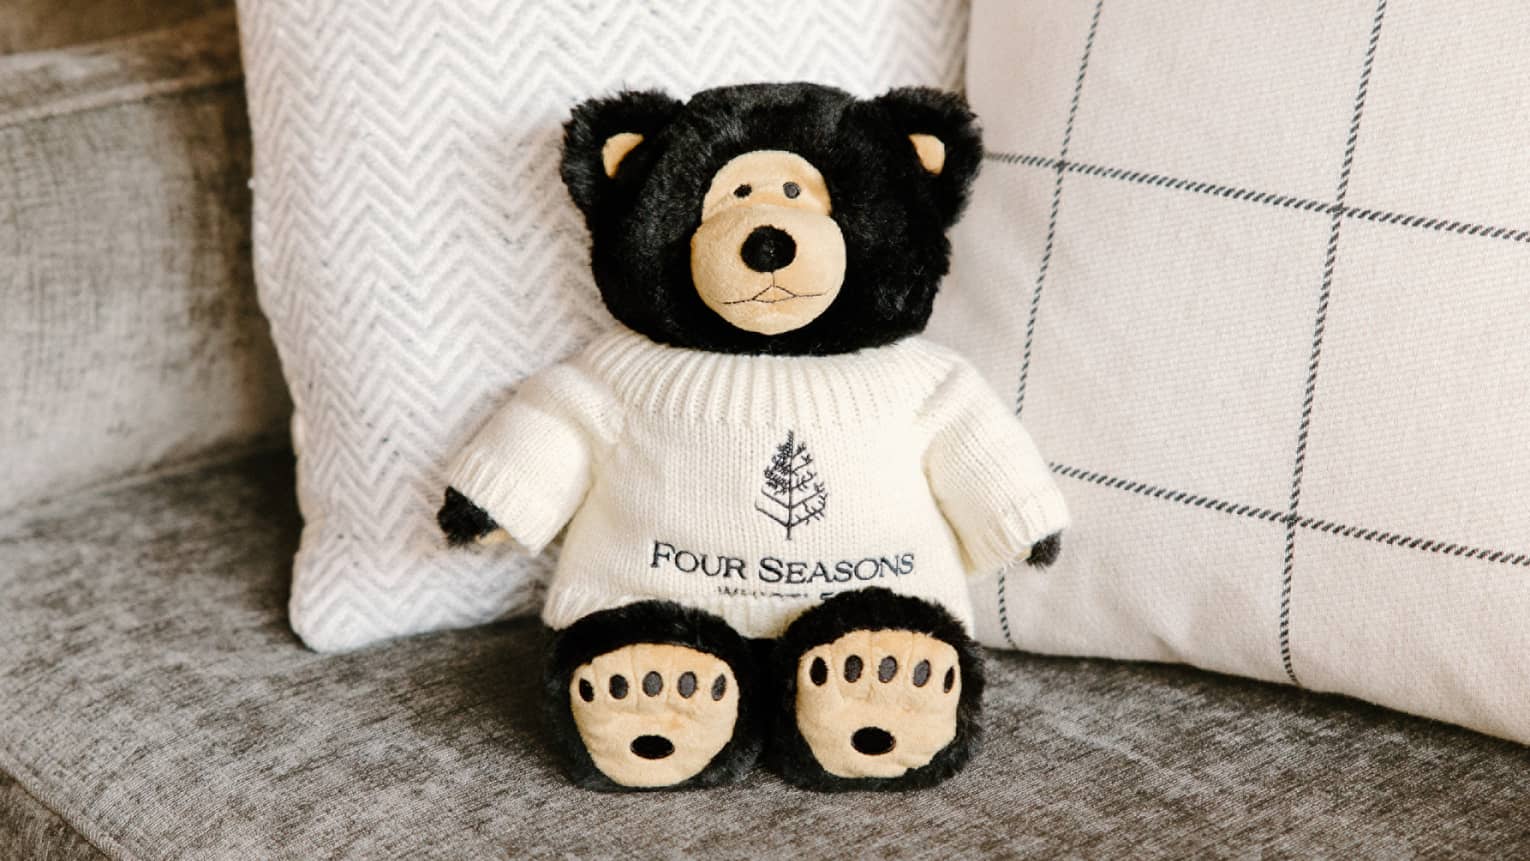 Stuffed black bear in cream-coloured sweater propped up on grey couch